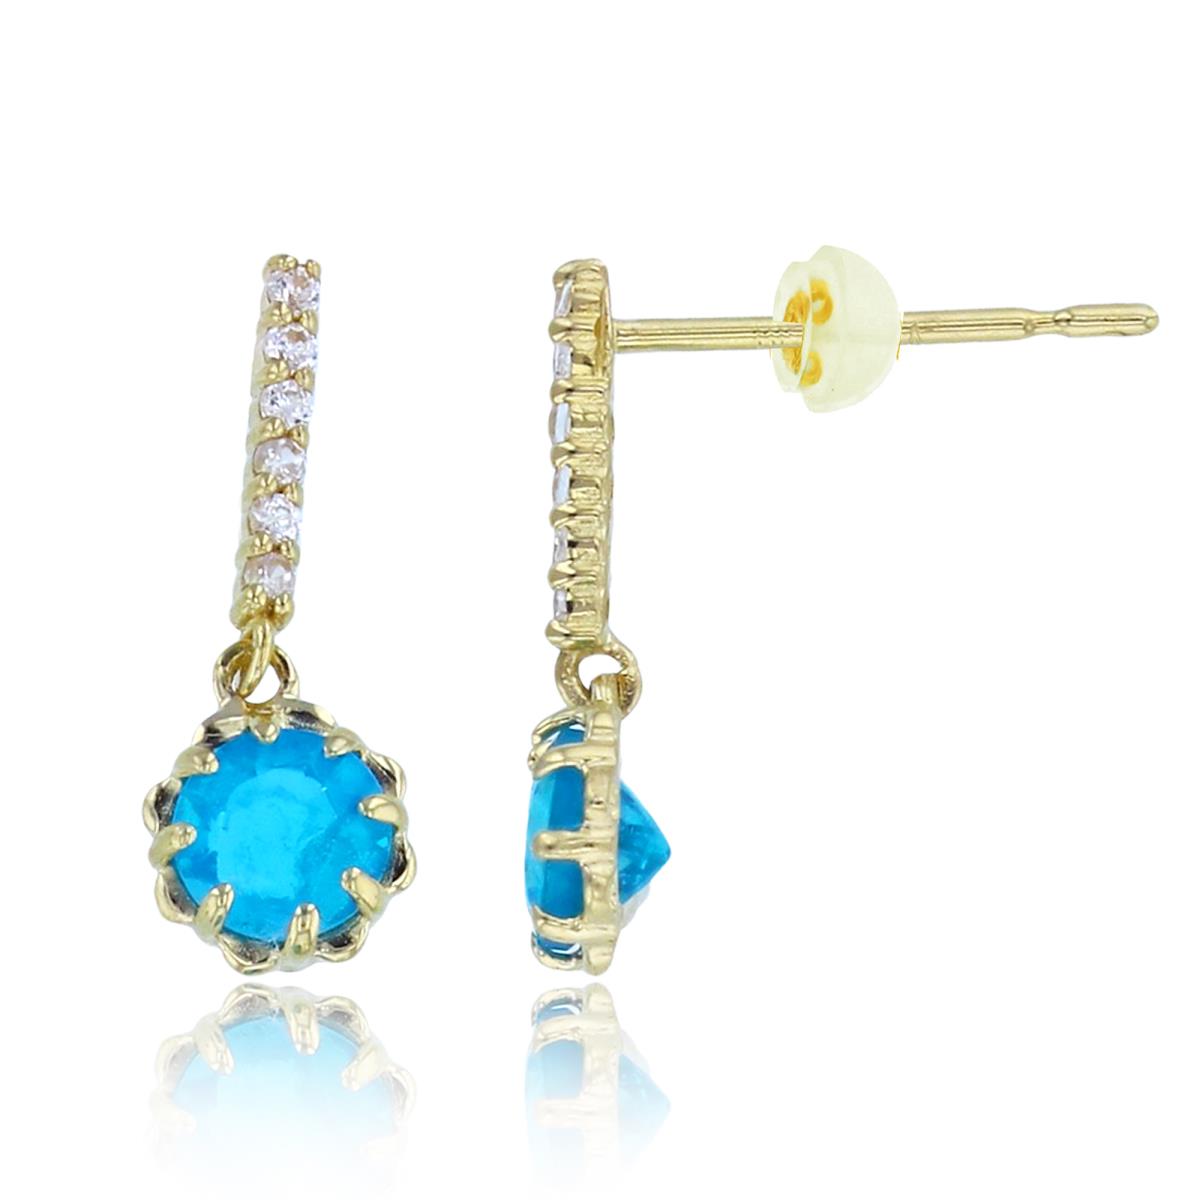 10K Yellow Gold 4mm Rnd Blue Apatite & Wh.Zircon Dangling Earrings with Silicon Backs